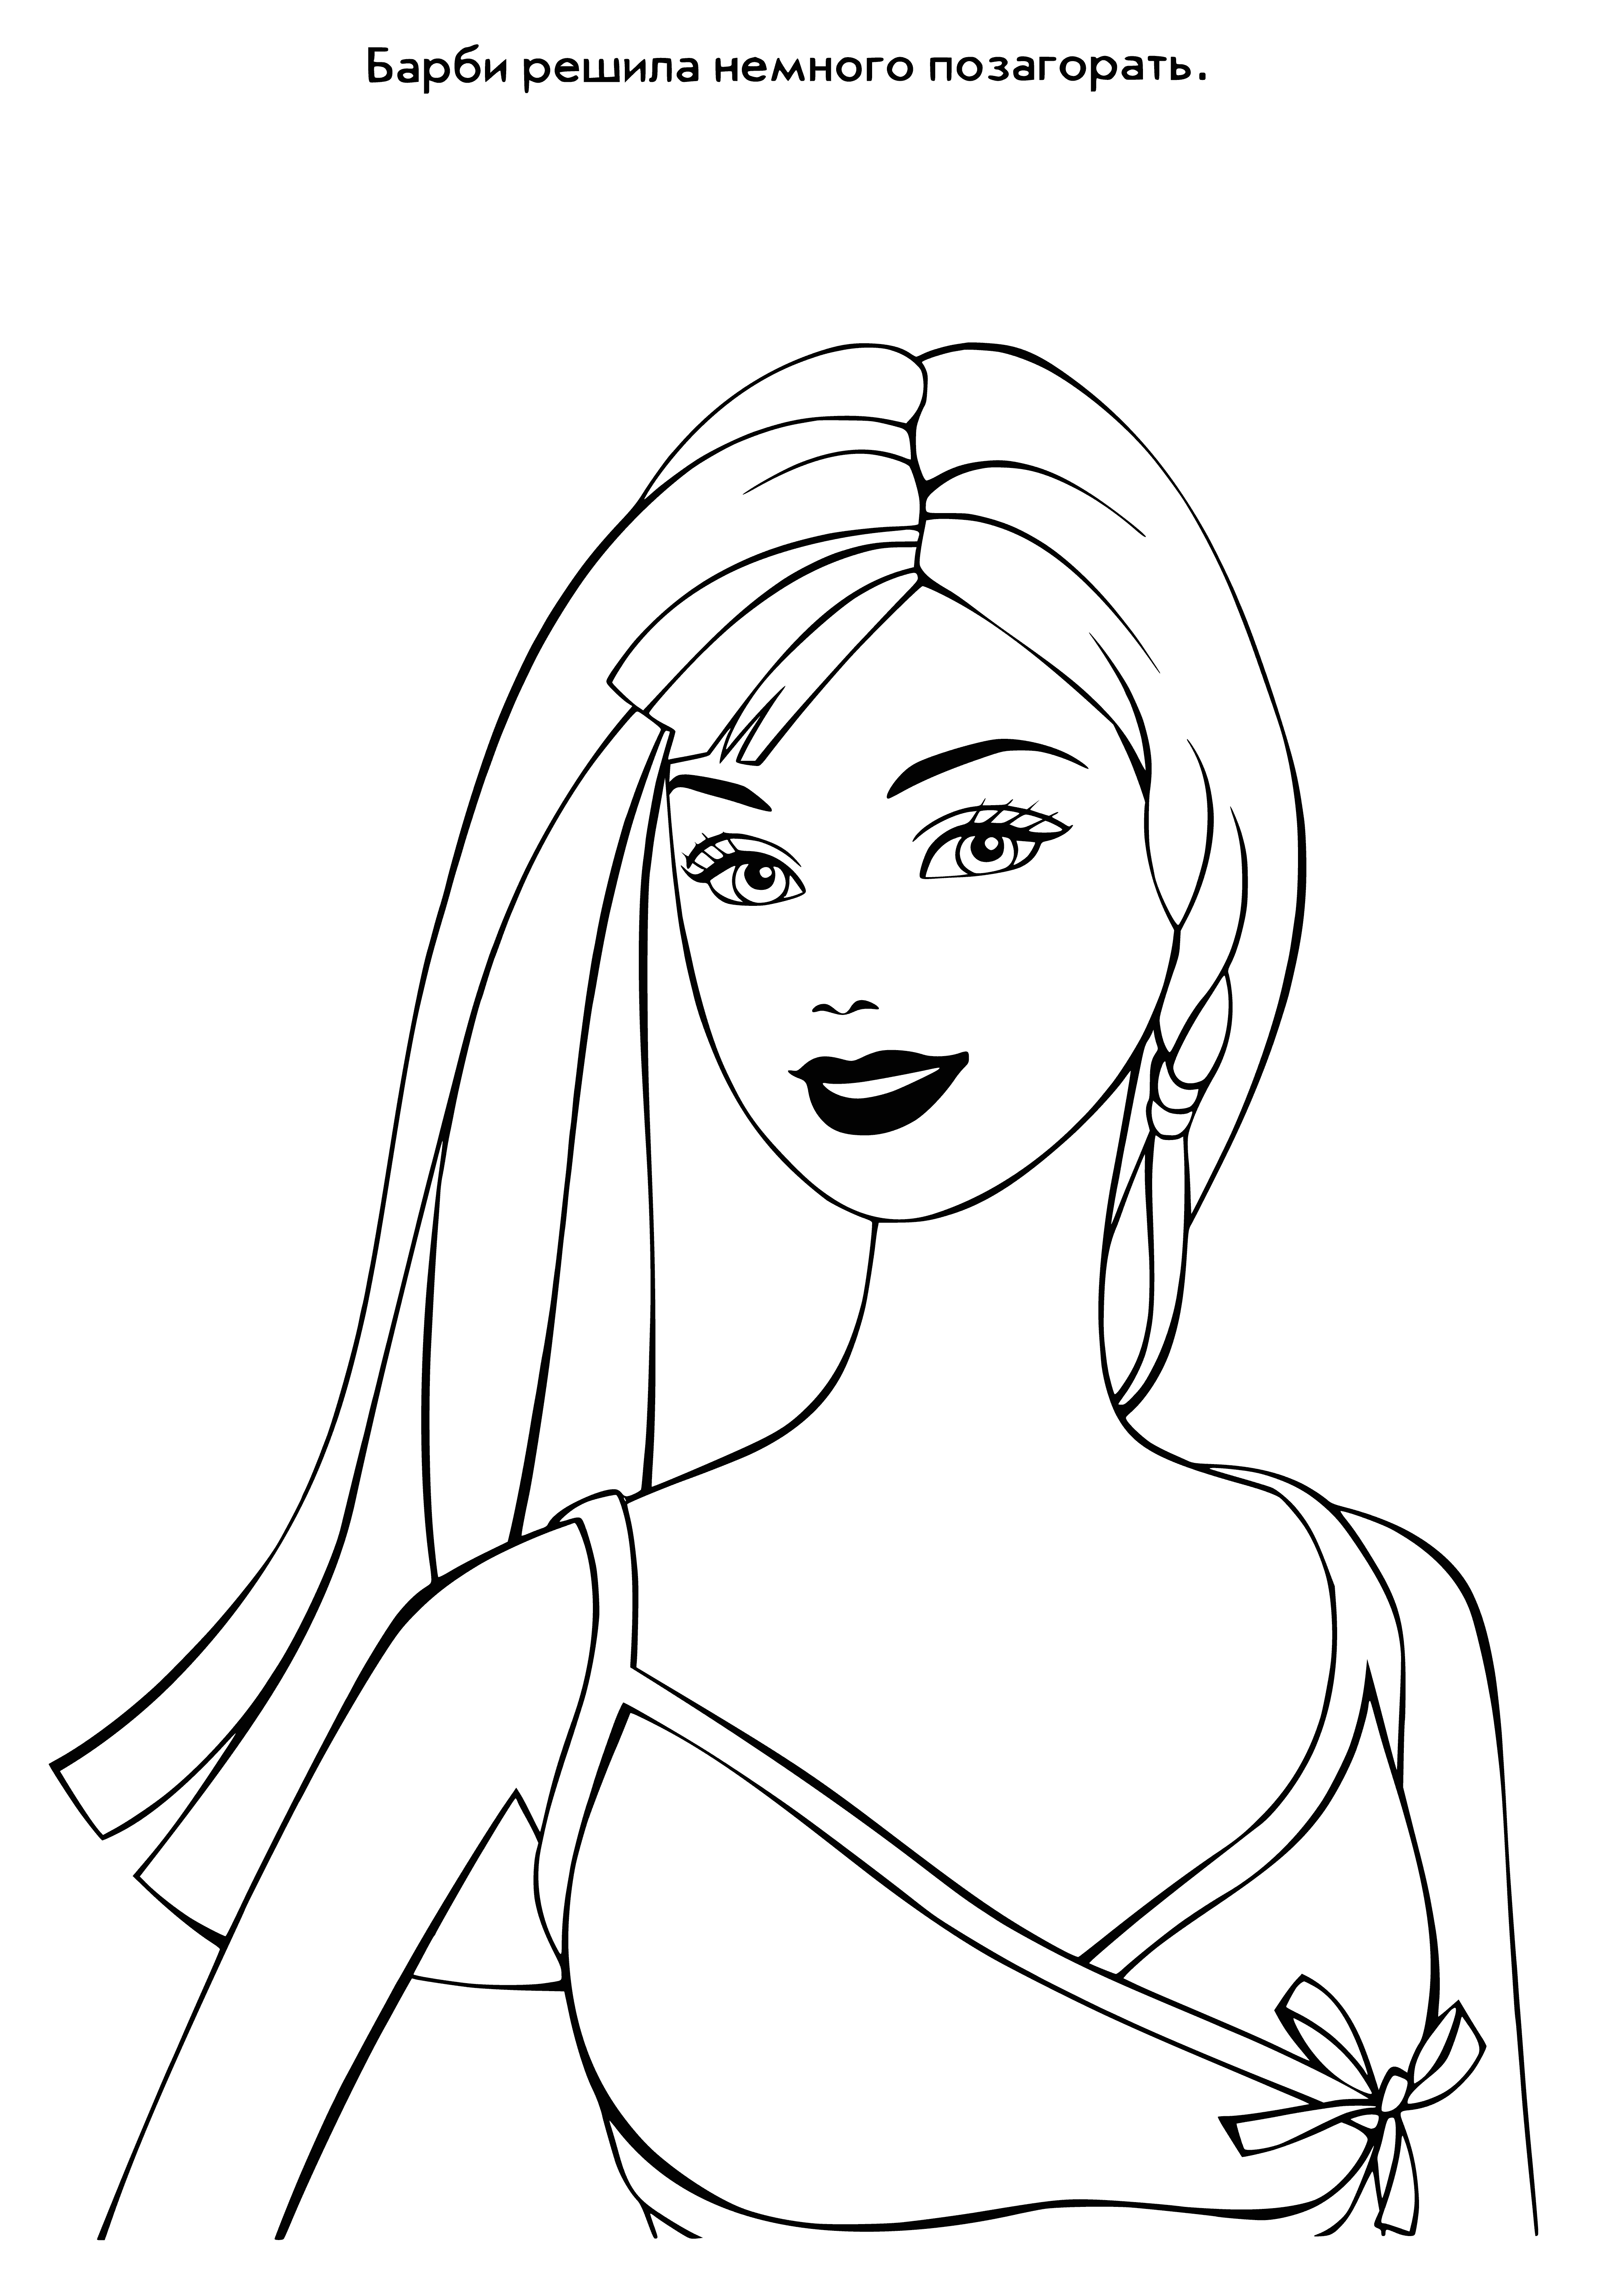 coloring page: Barbie is a fashionable doll with long blonde hair, blue eyes, pink dress & white accessories, holding a blue purse in her left hand.